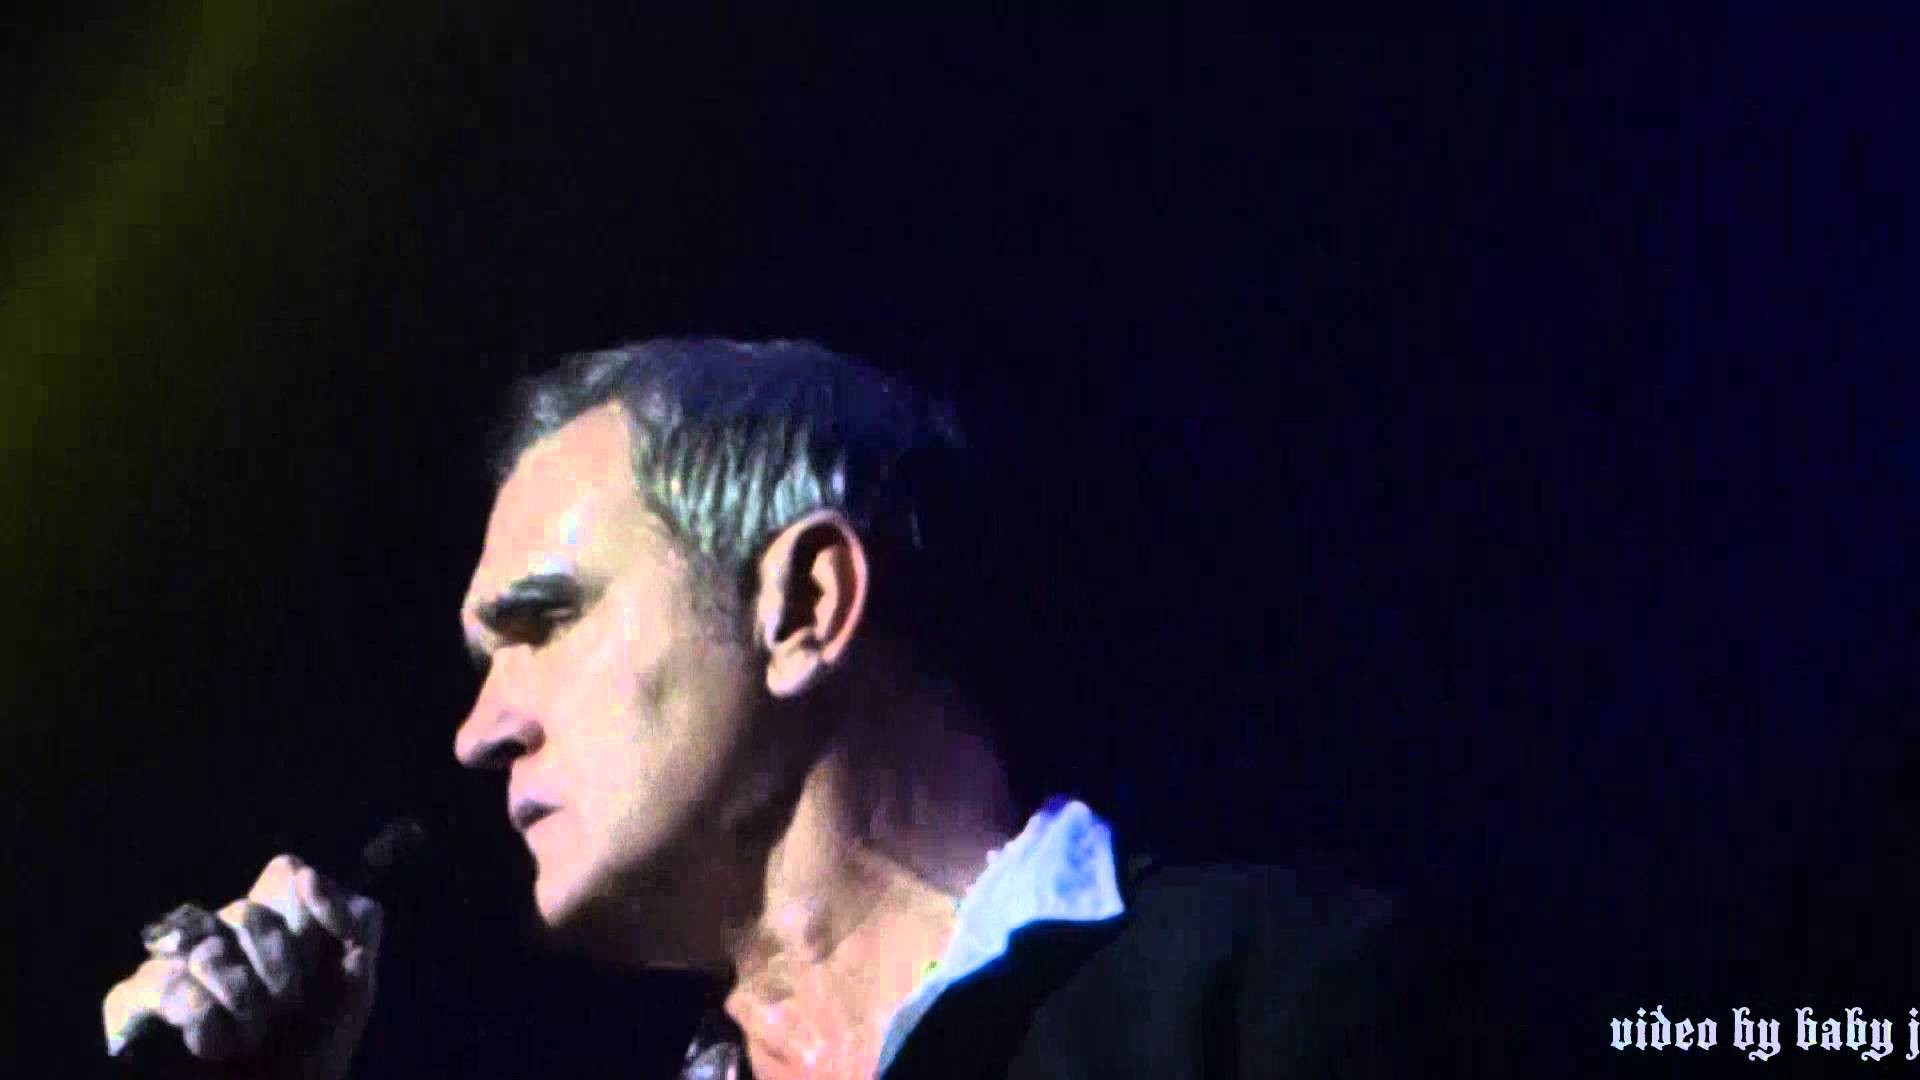 1920x1080 Morrissey-STAIRCASE AT THE UNIVERSITY-Live-The Masonic, San Francisco,  December 29, 2015-Smiths-MOZ